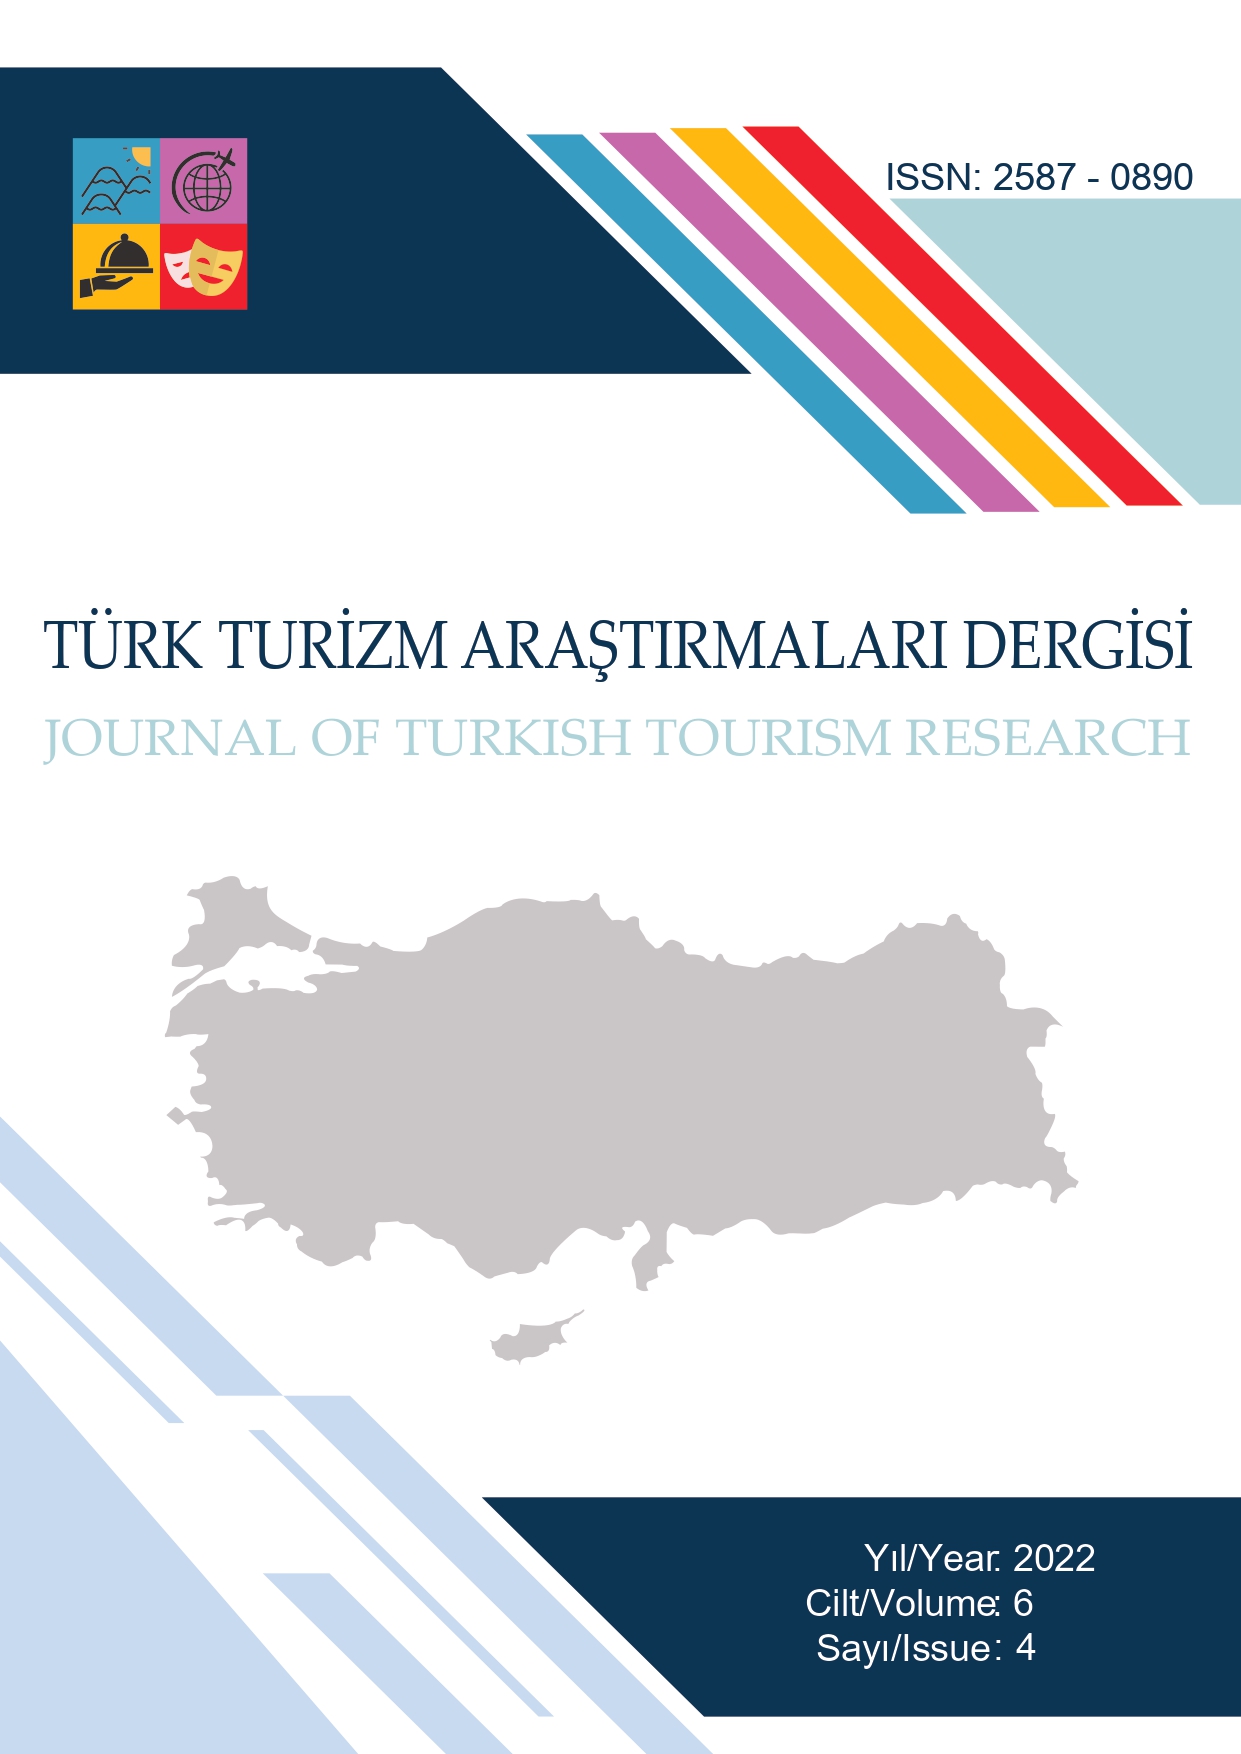 Analysis of Tourism Policies of Political Parties in Türkiye: Descriptive Analysis of Content for Party Programs Cover Image